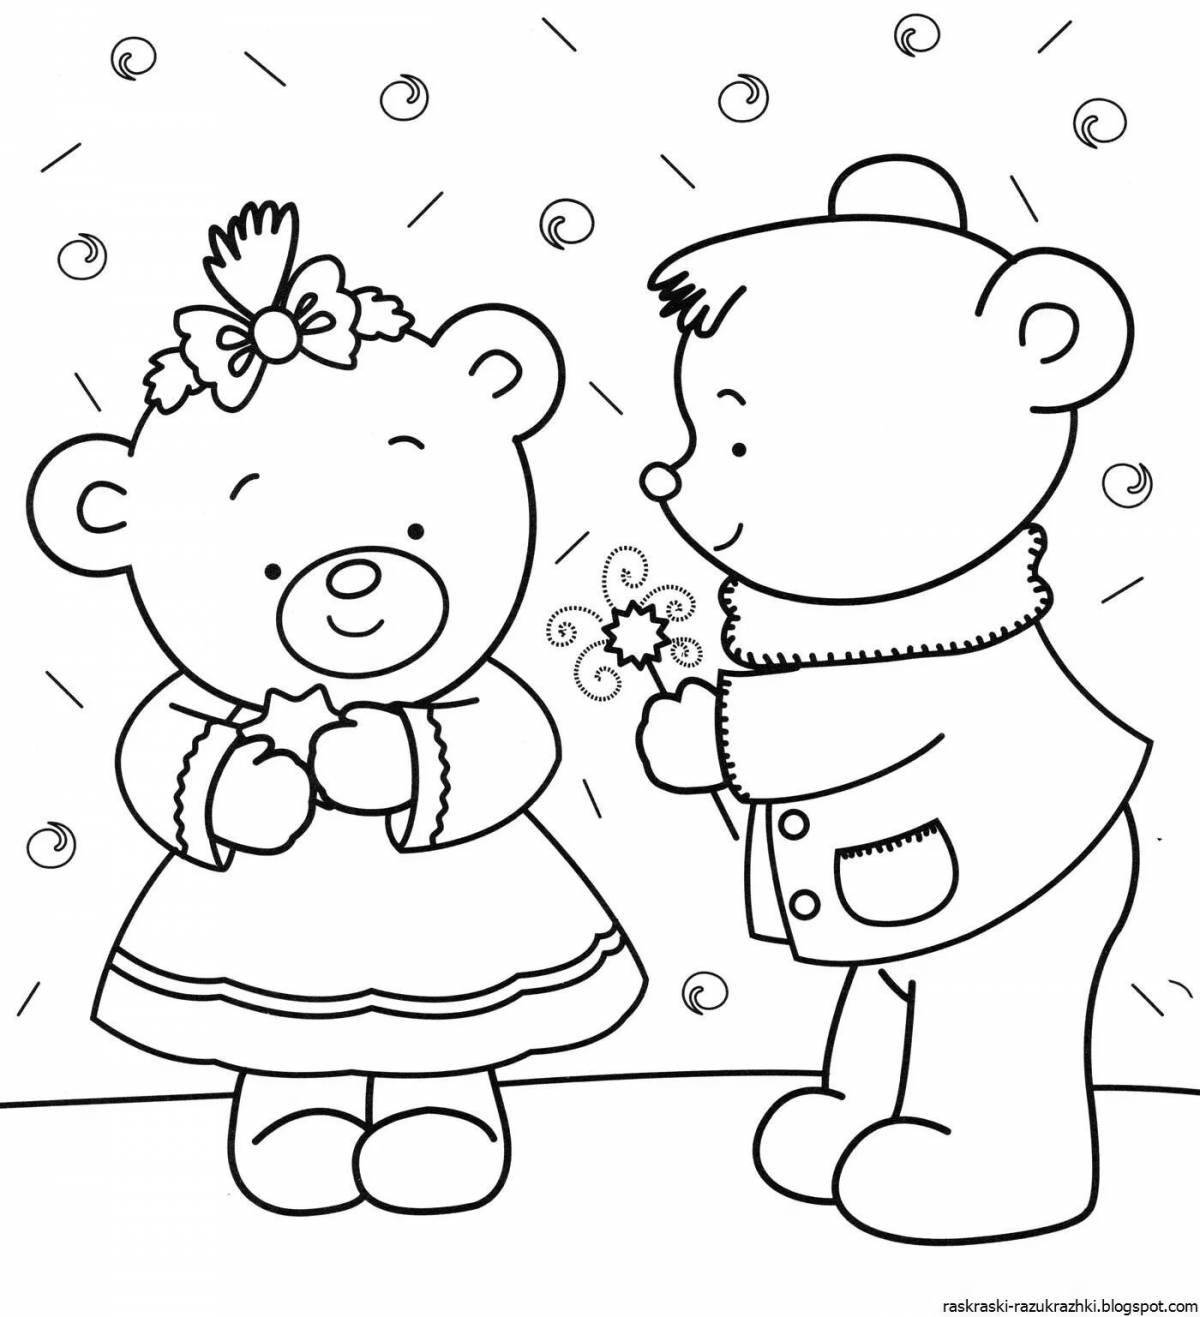 Cozy teddy bear coloring book for girls